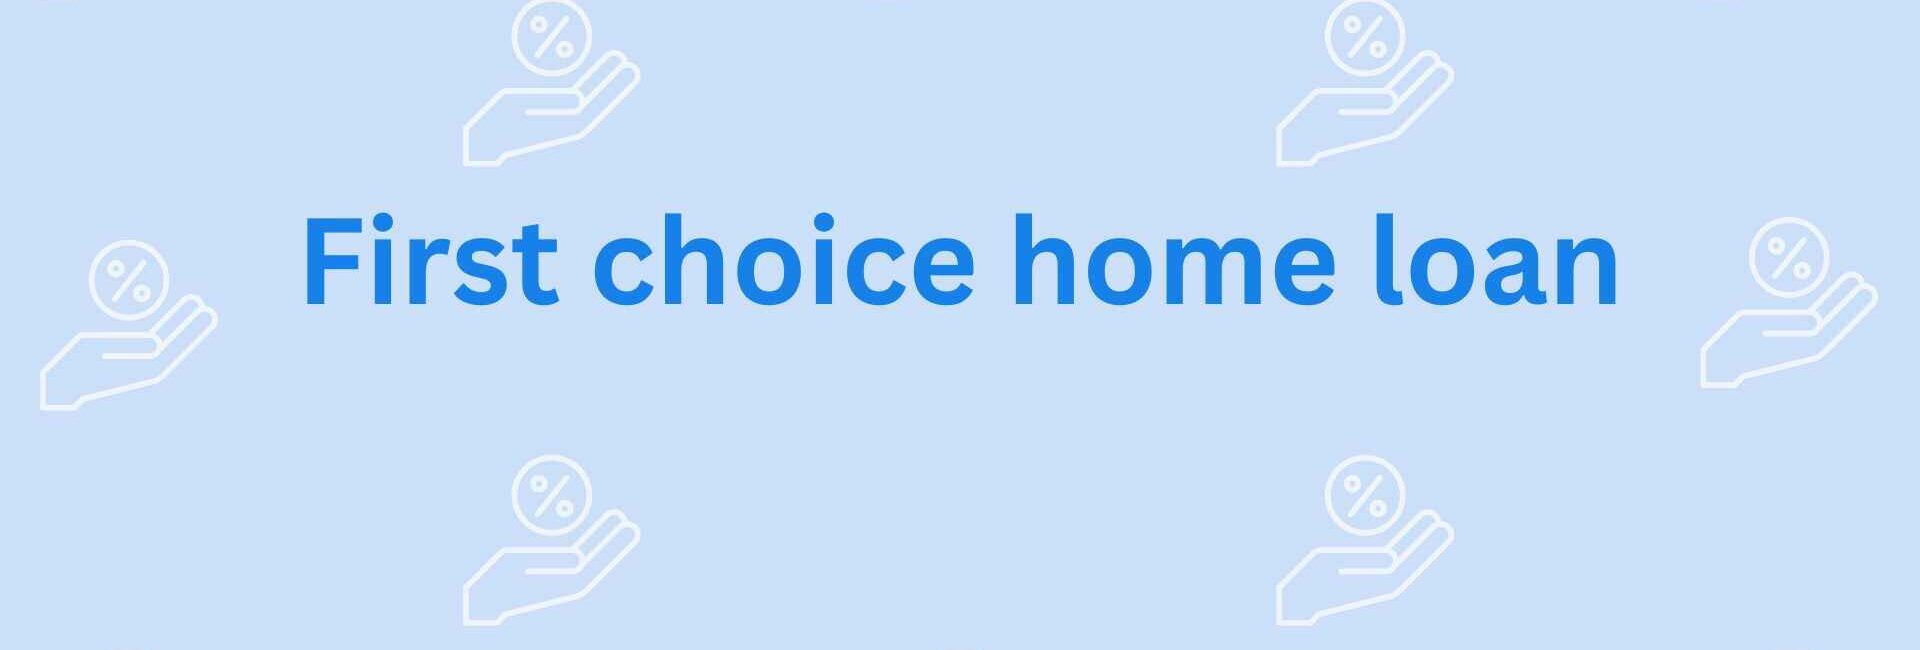 First choice home loan- Home Loan Assistance in Noida